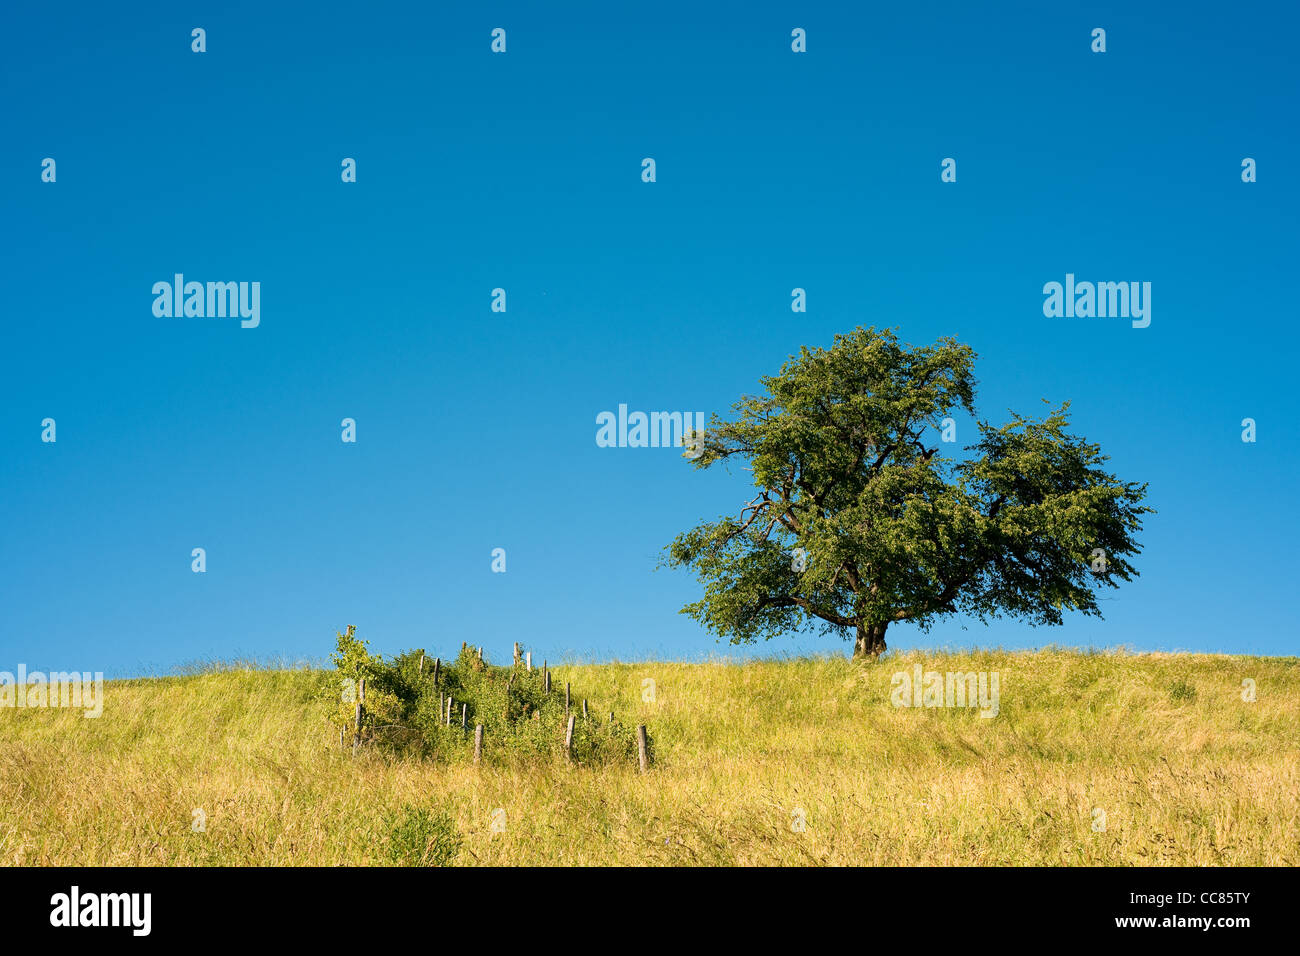 single tree on rural field with blue sky Stock Photo